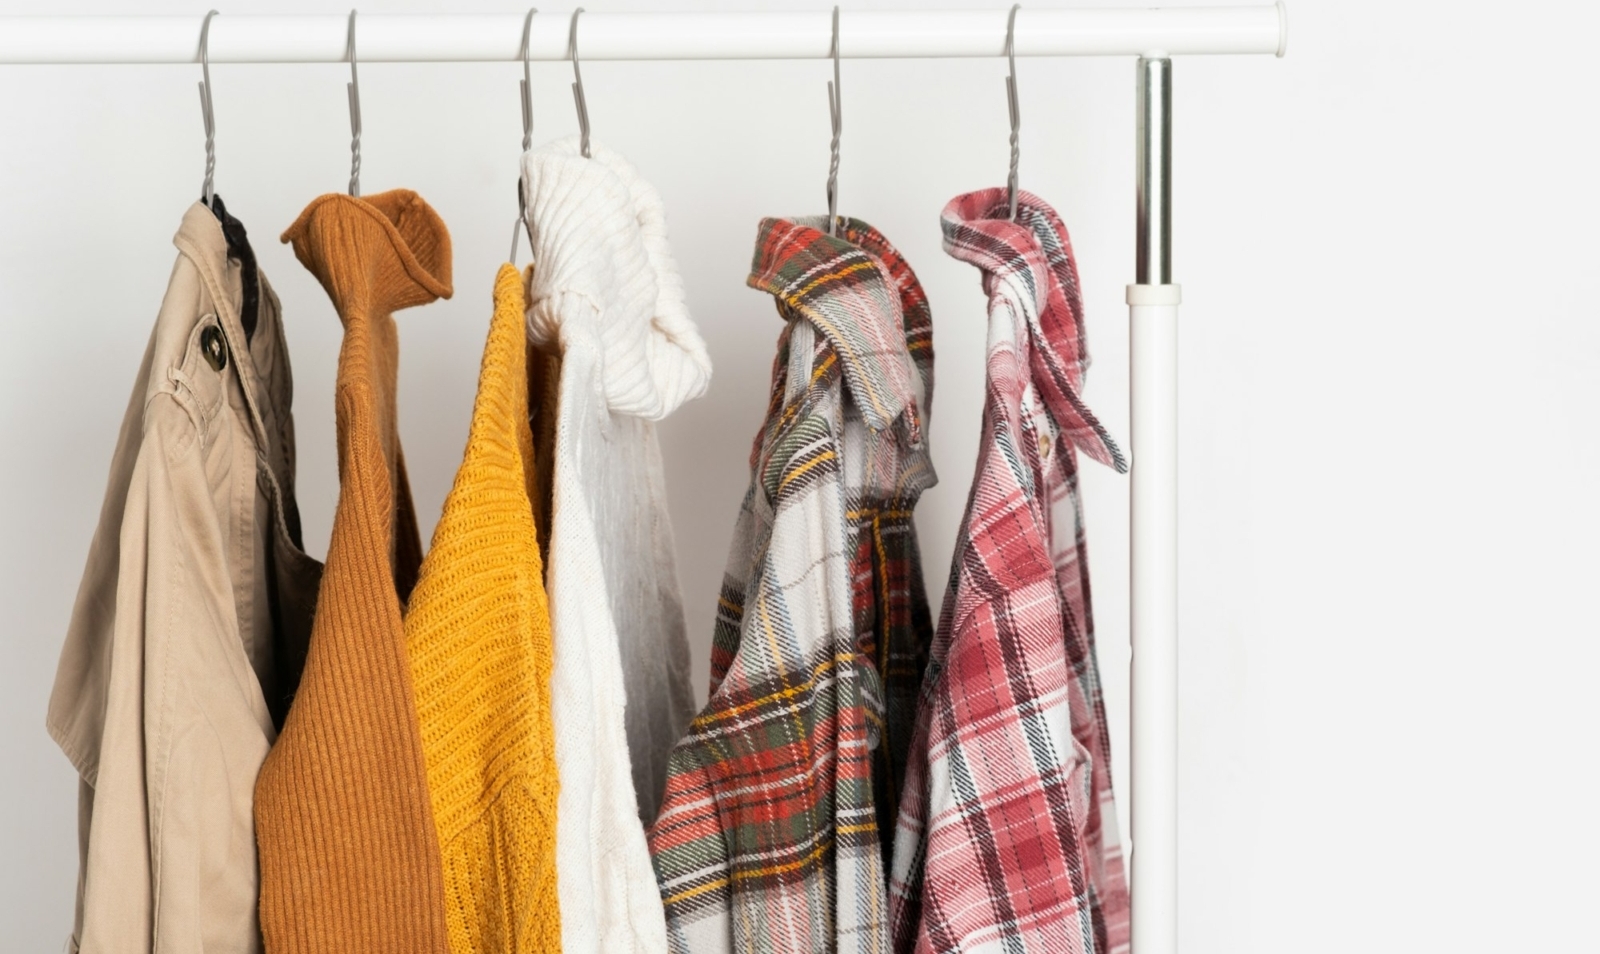 Autumn vintage clothing hangs on hangers on the rack. Beige trench coats, sweaters, plaid shirts